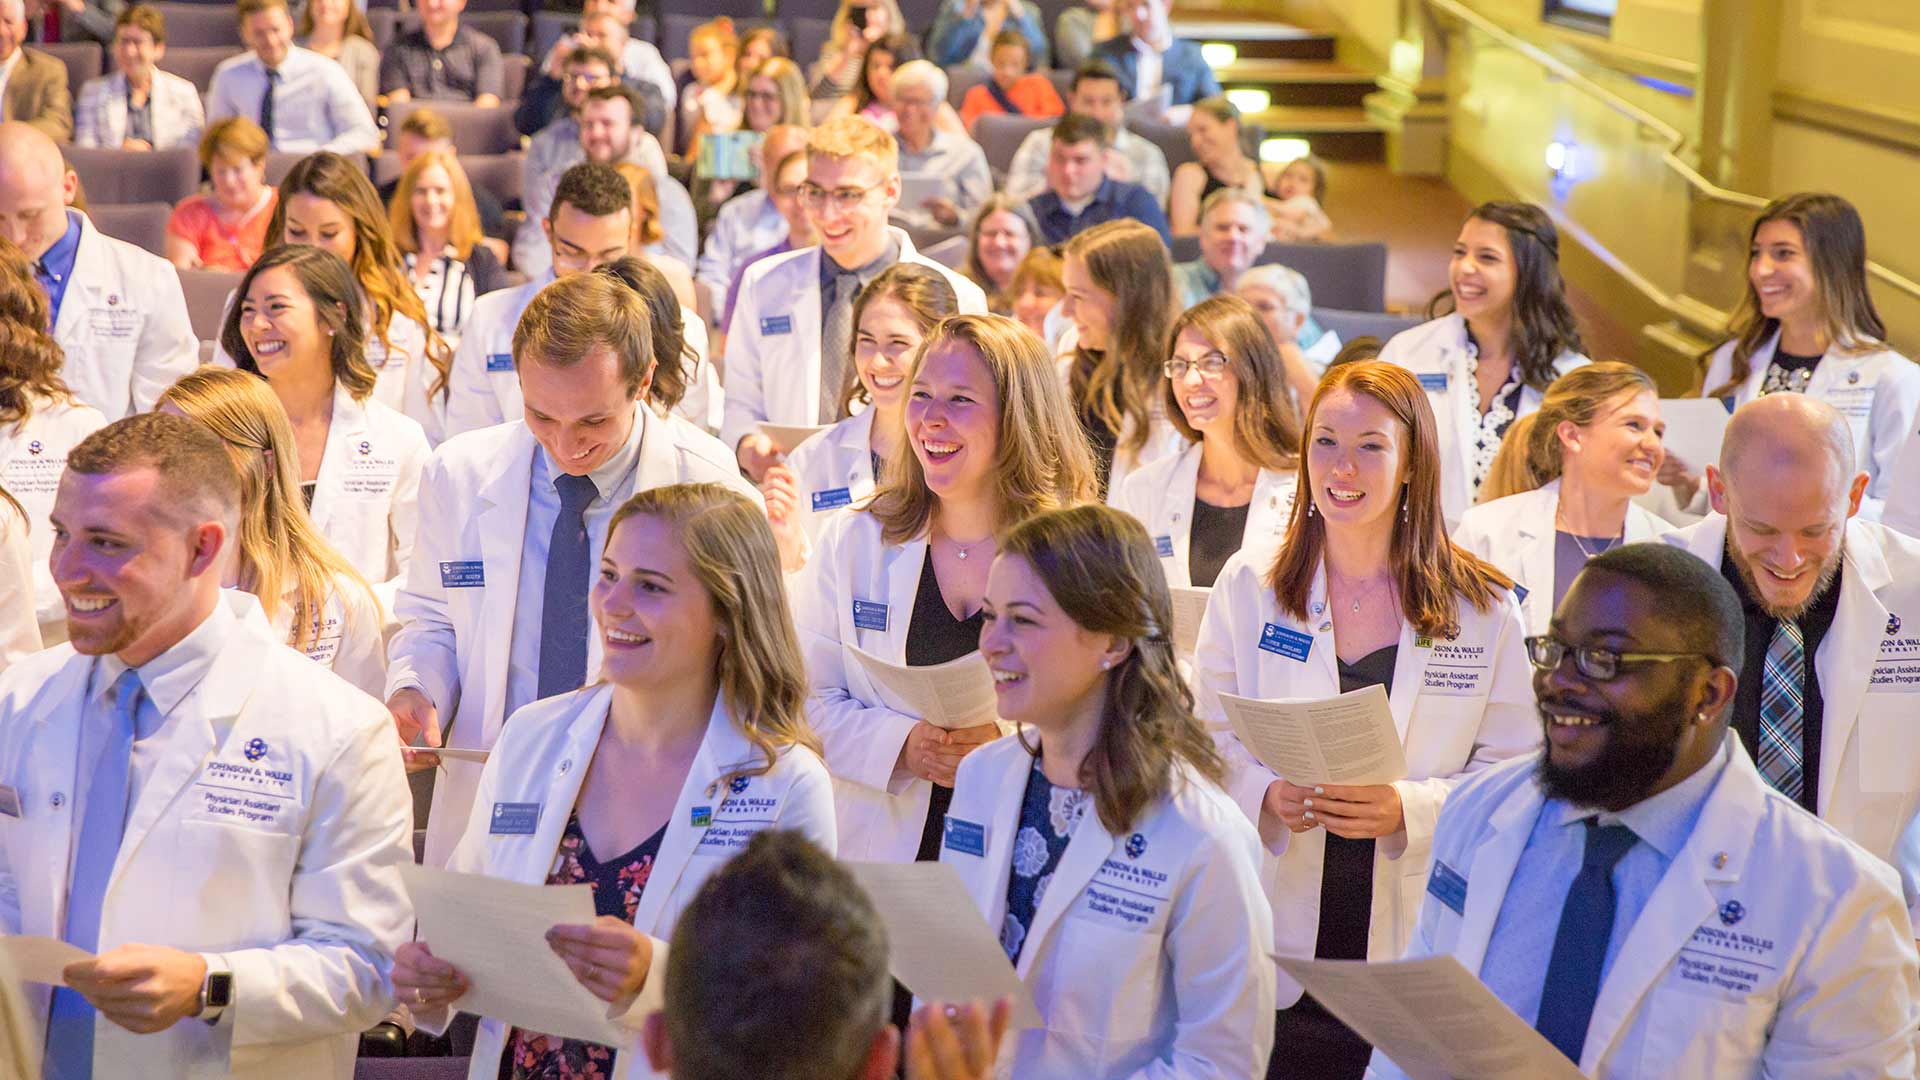 PA students laughing during White Coat ceremony.